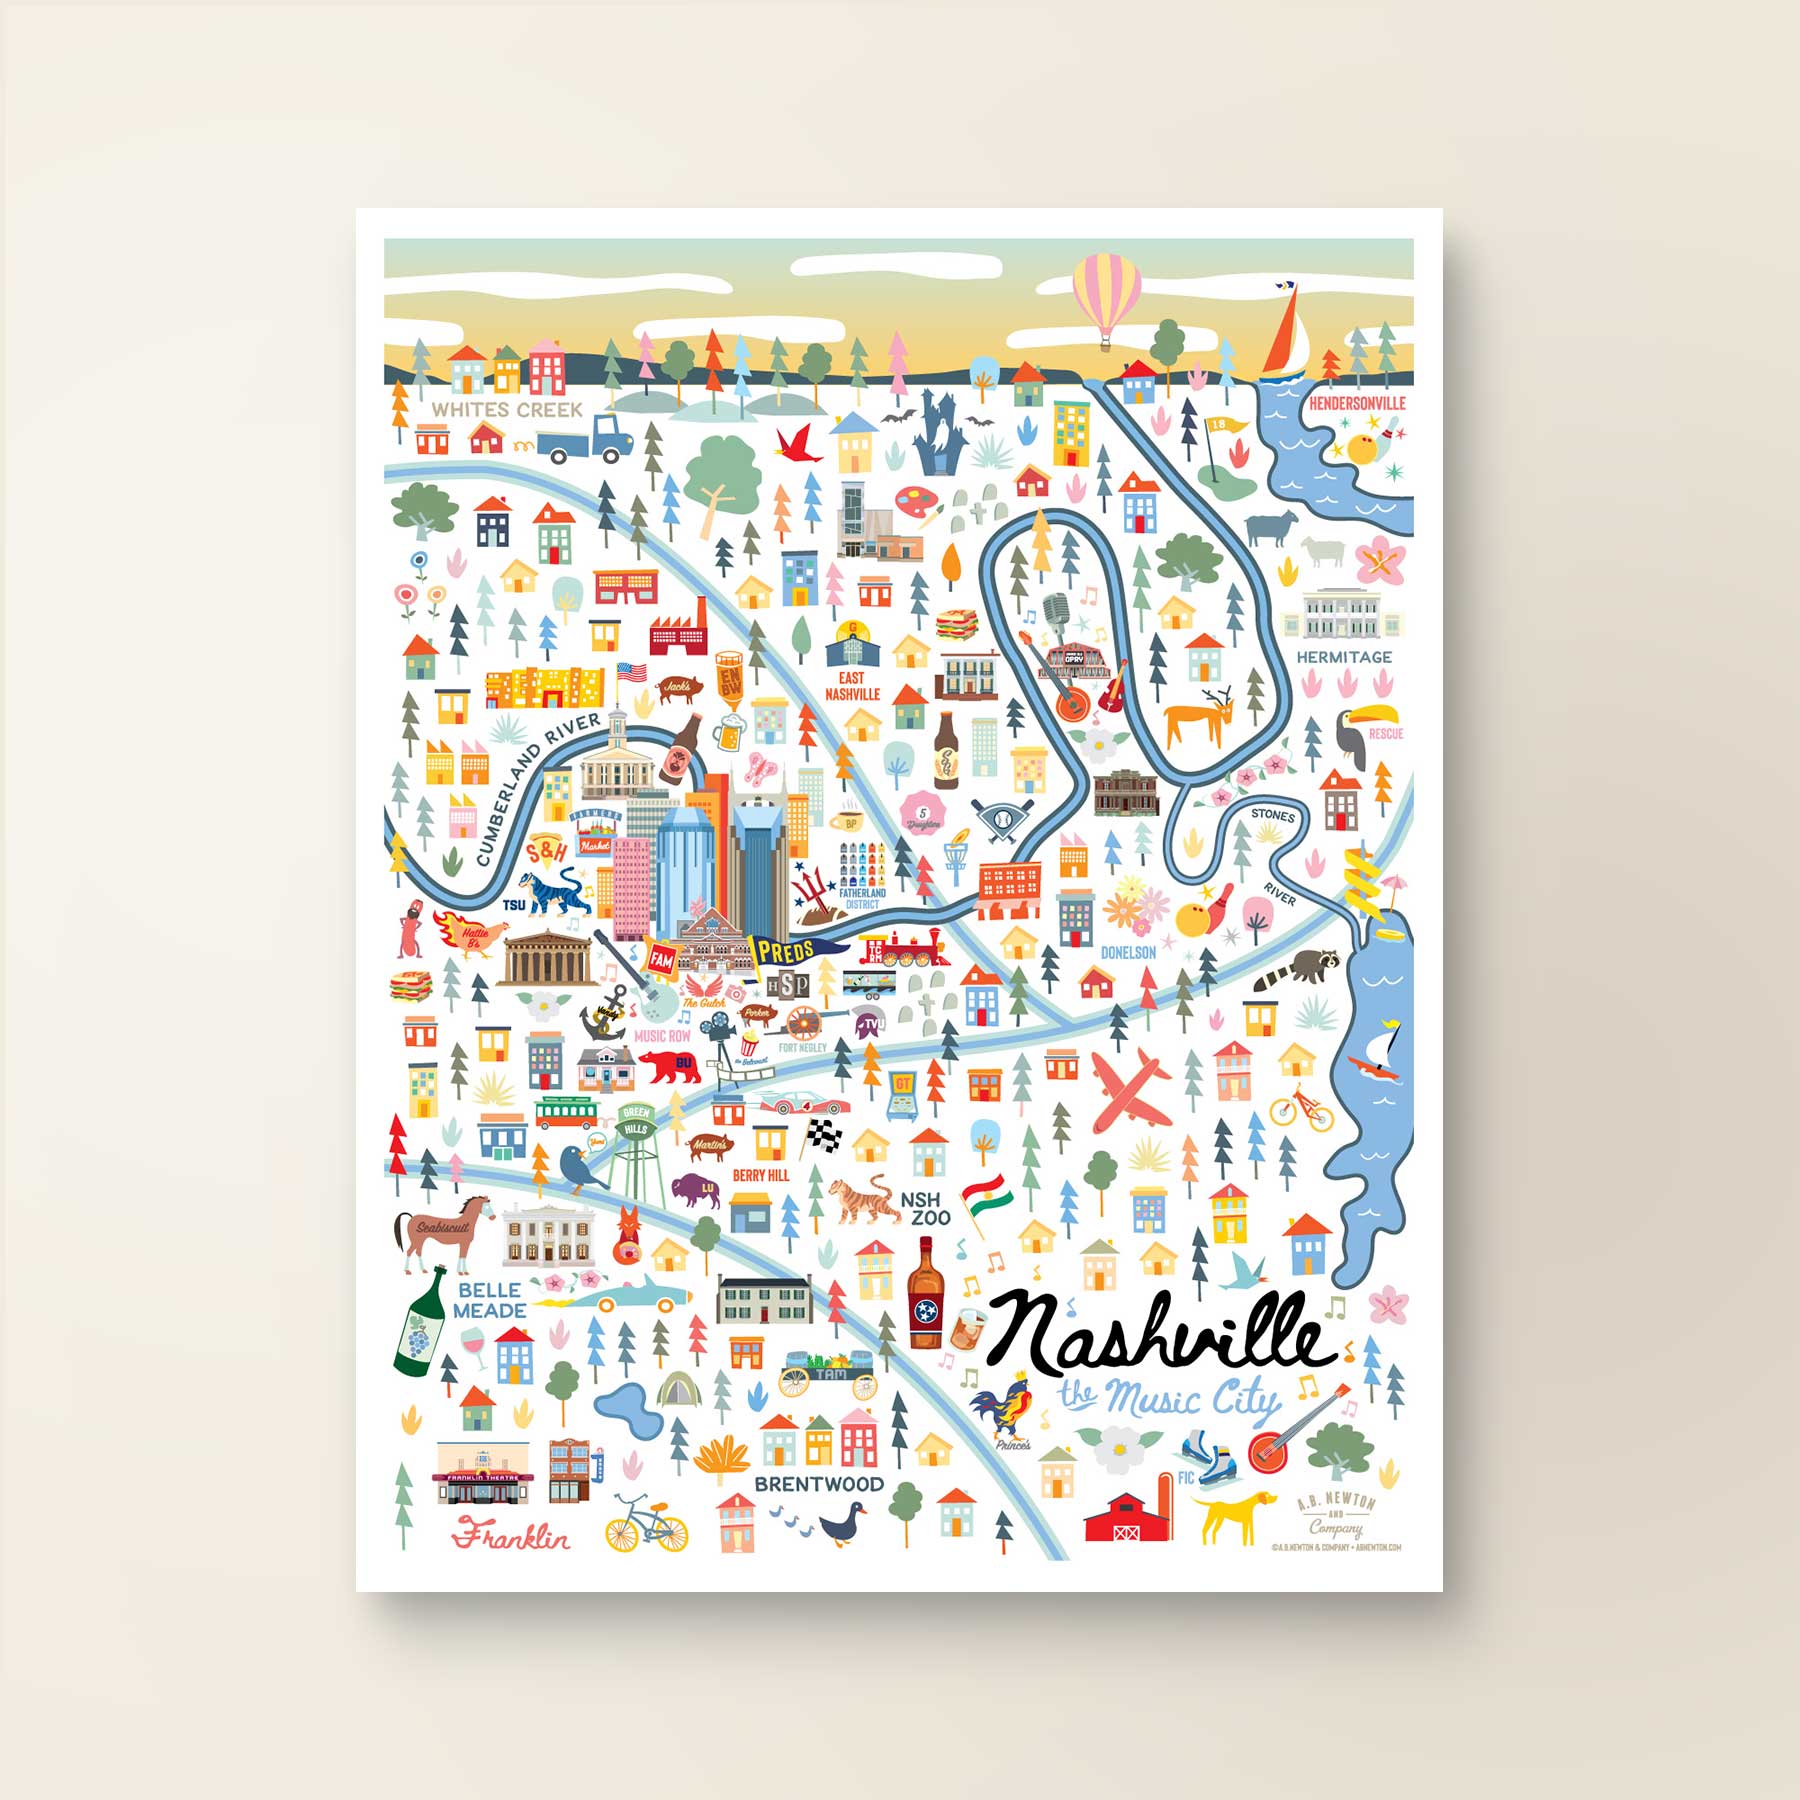 City of Nashville Tennessee | City Print Series - A. B. Newton and Company